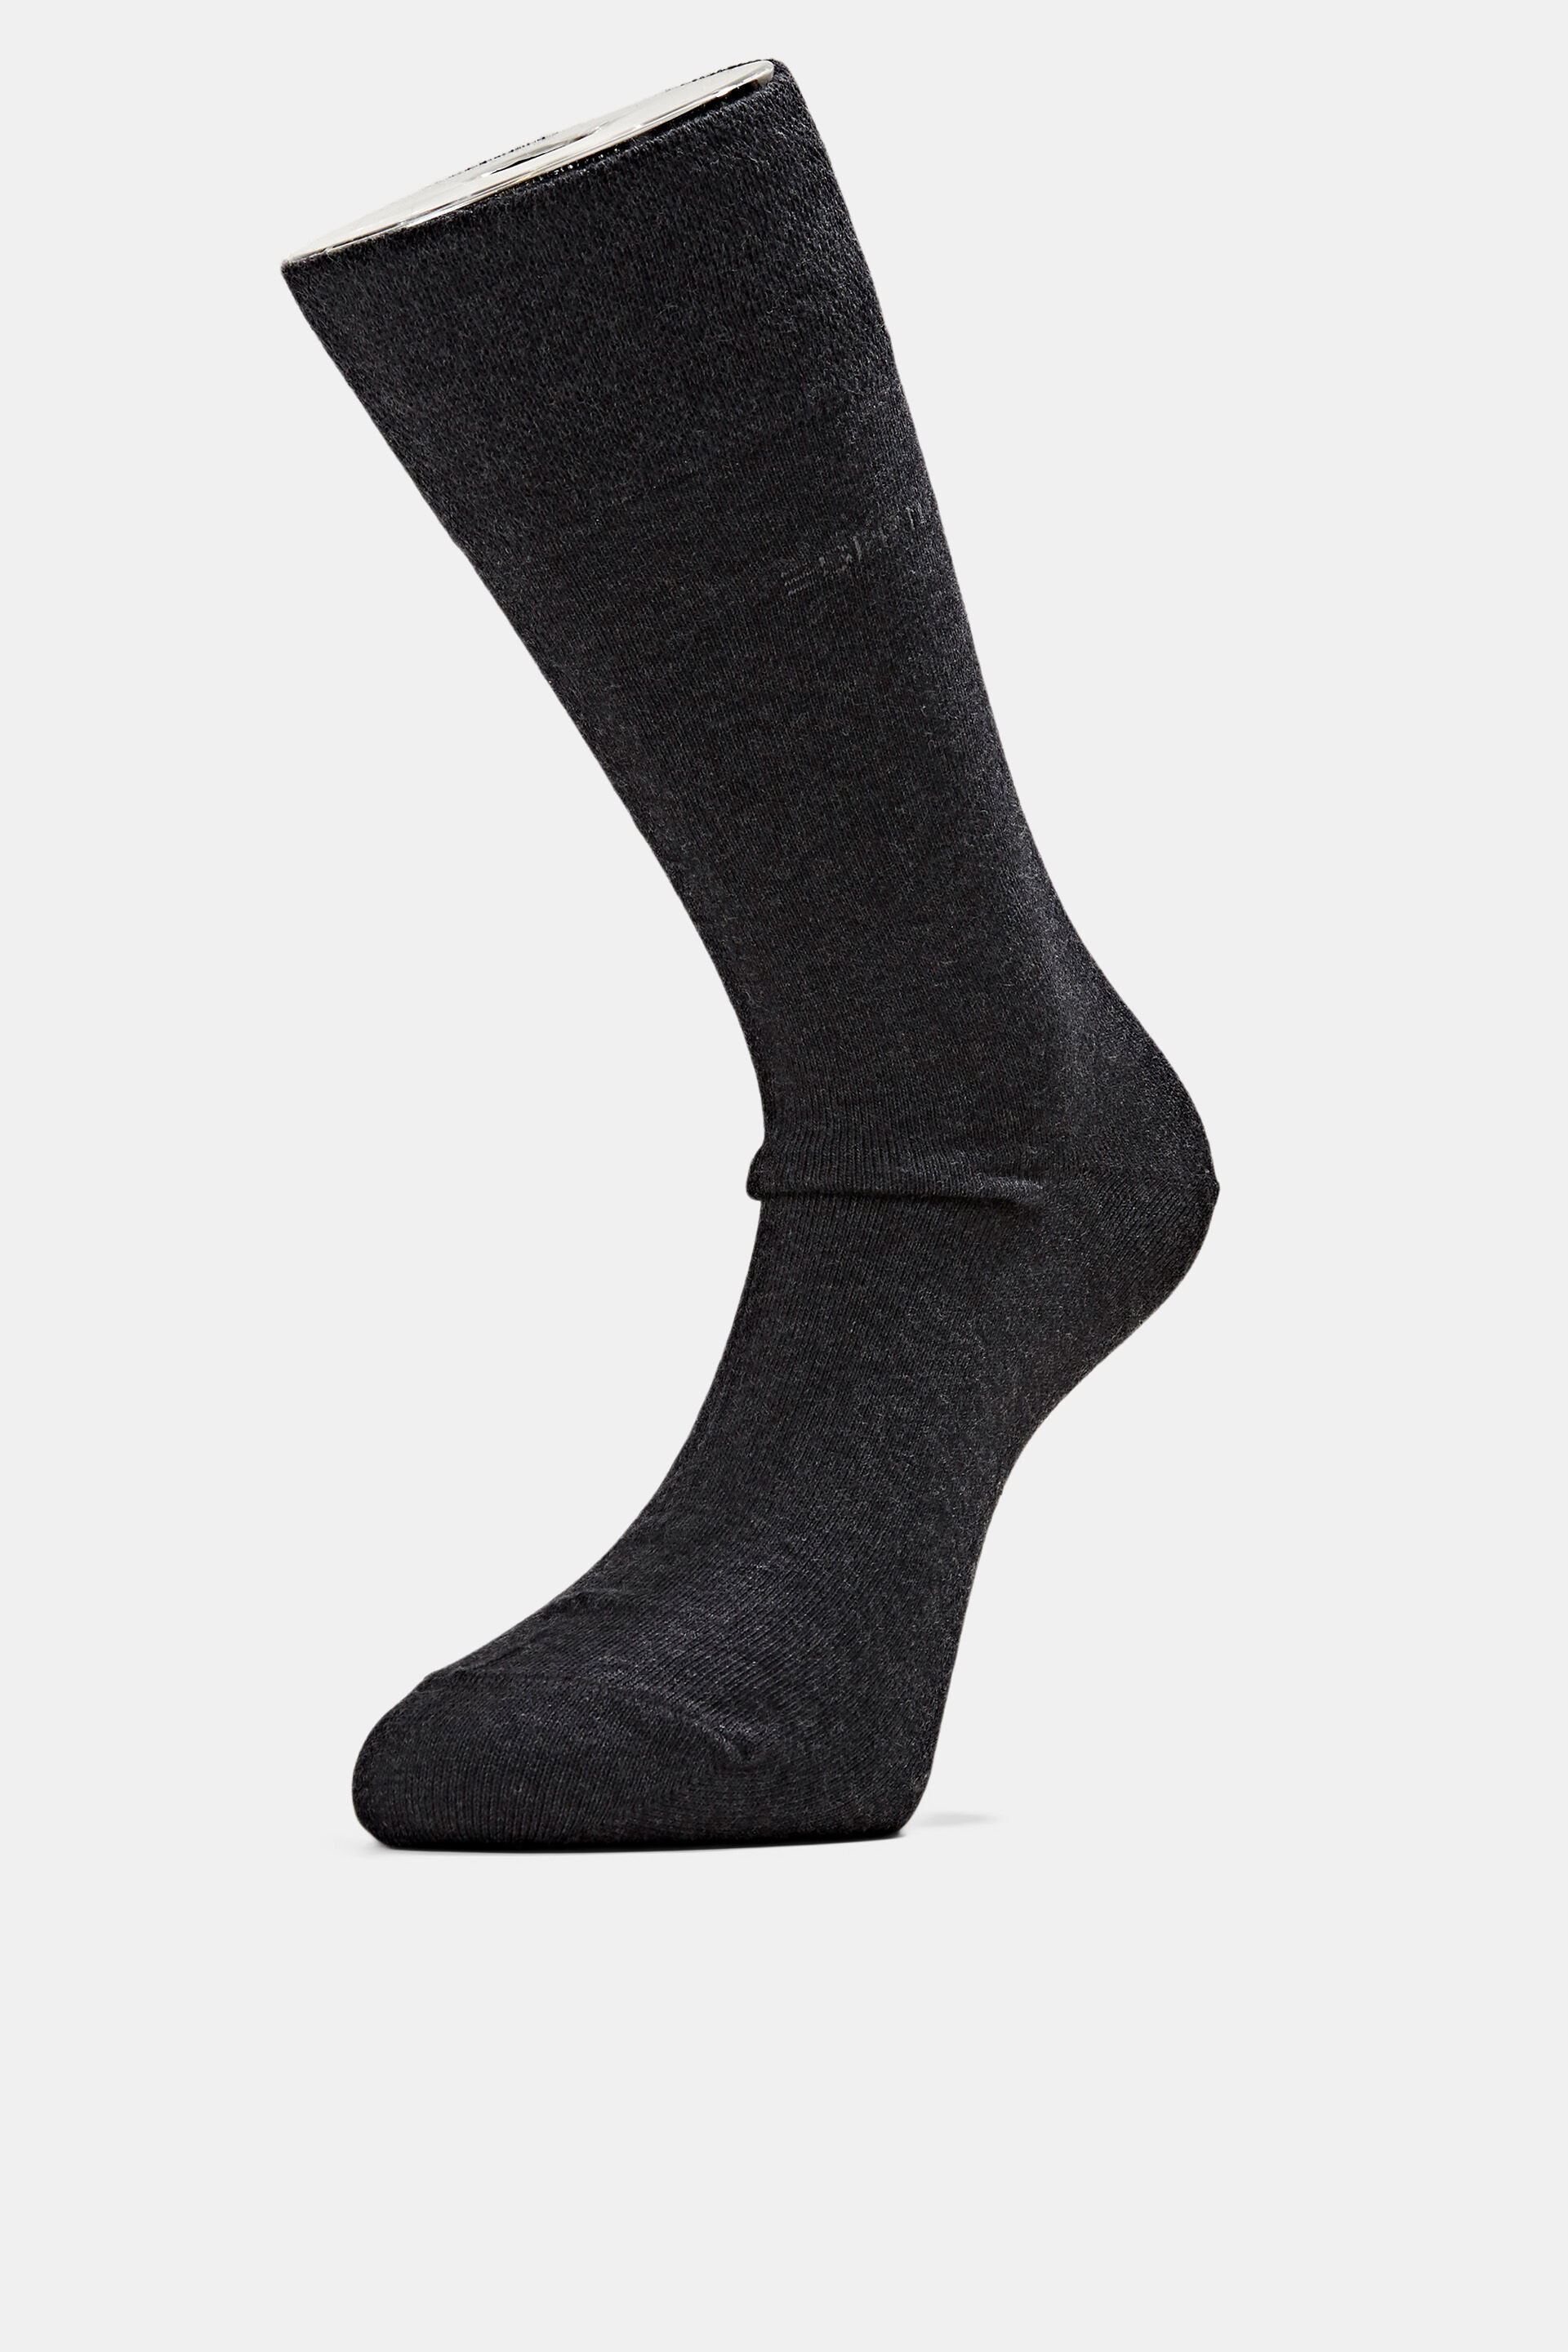 Esprit with soft Double socks pack of organic cotton cuffs, blended